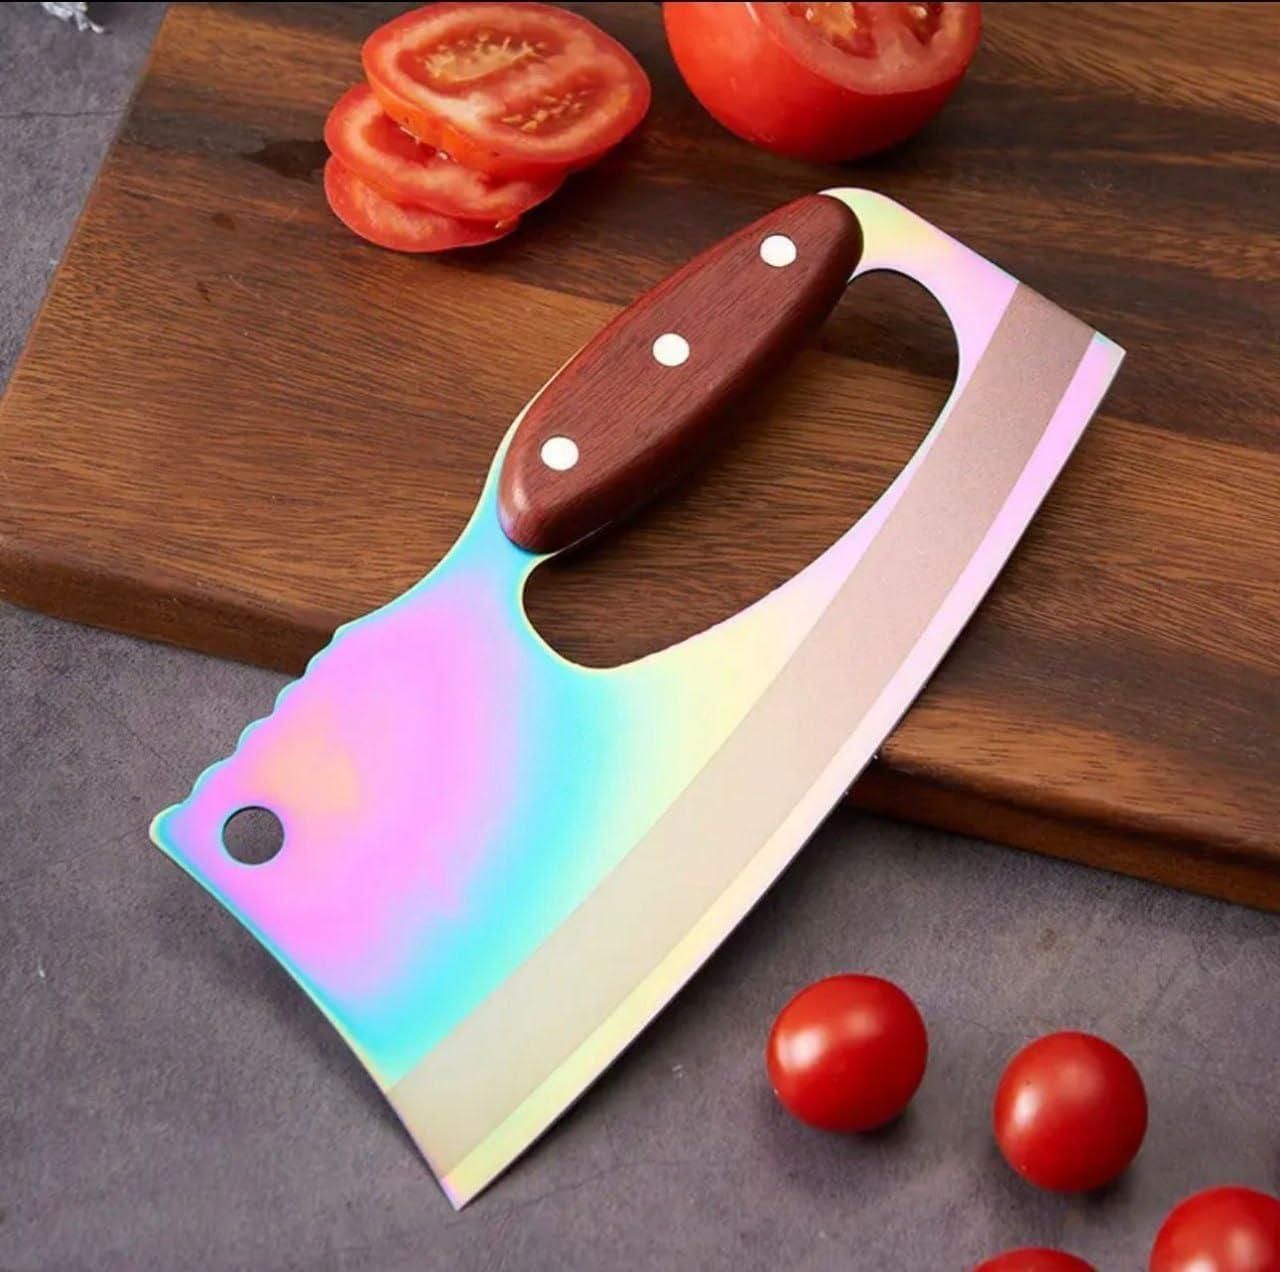 ProSlice Artisan Knives - Premium Stainless Steel Chef Knife Set with Wooden Handle.